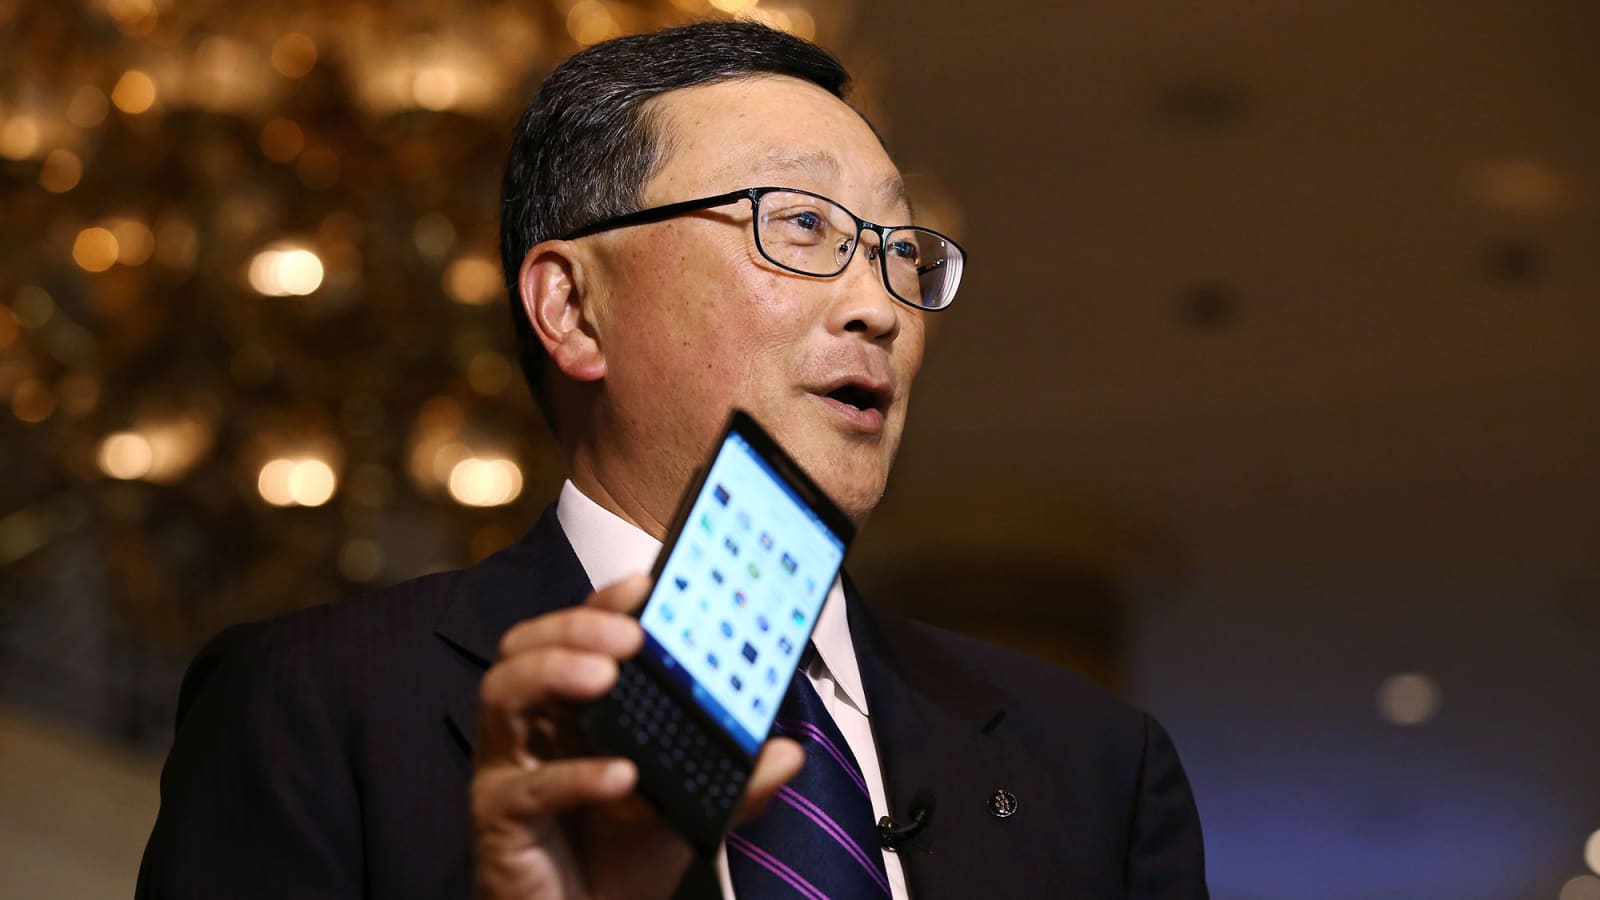 other-companies-should-make-blackberry-like-phones-says-blackberry-ceo-john-chen